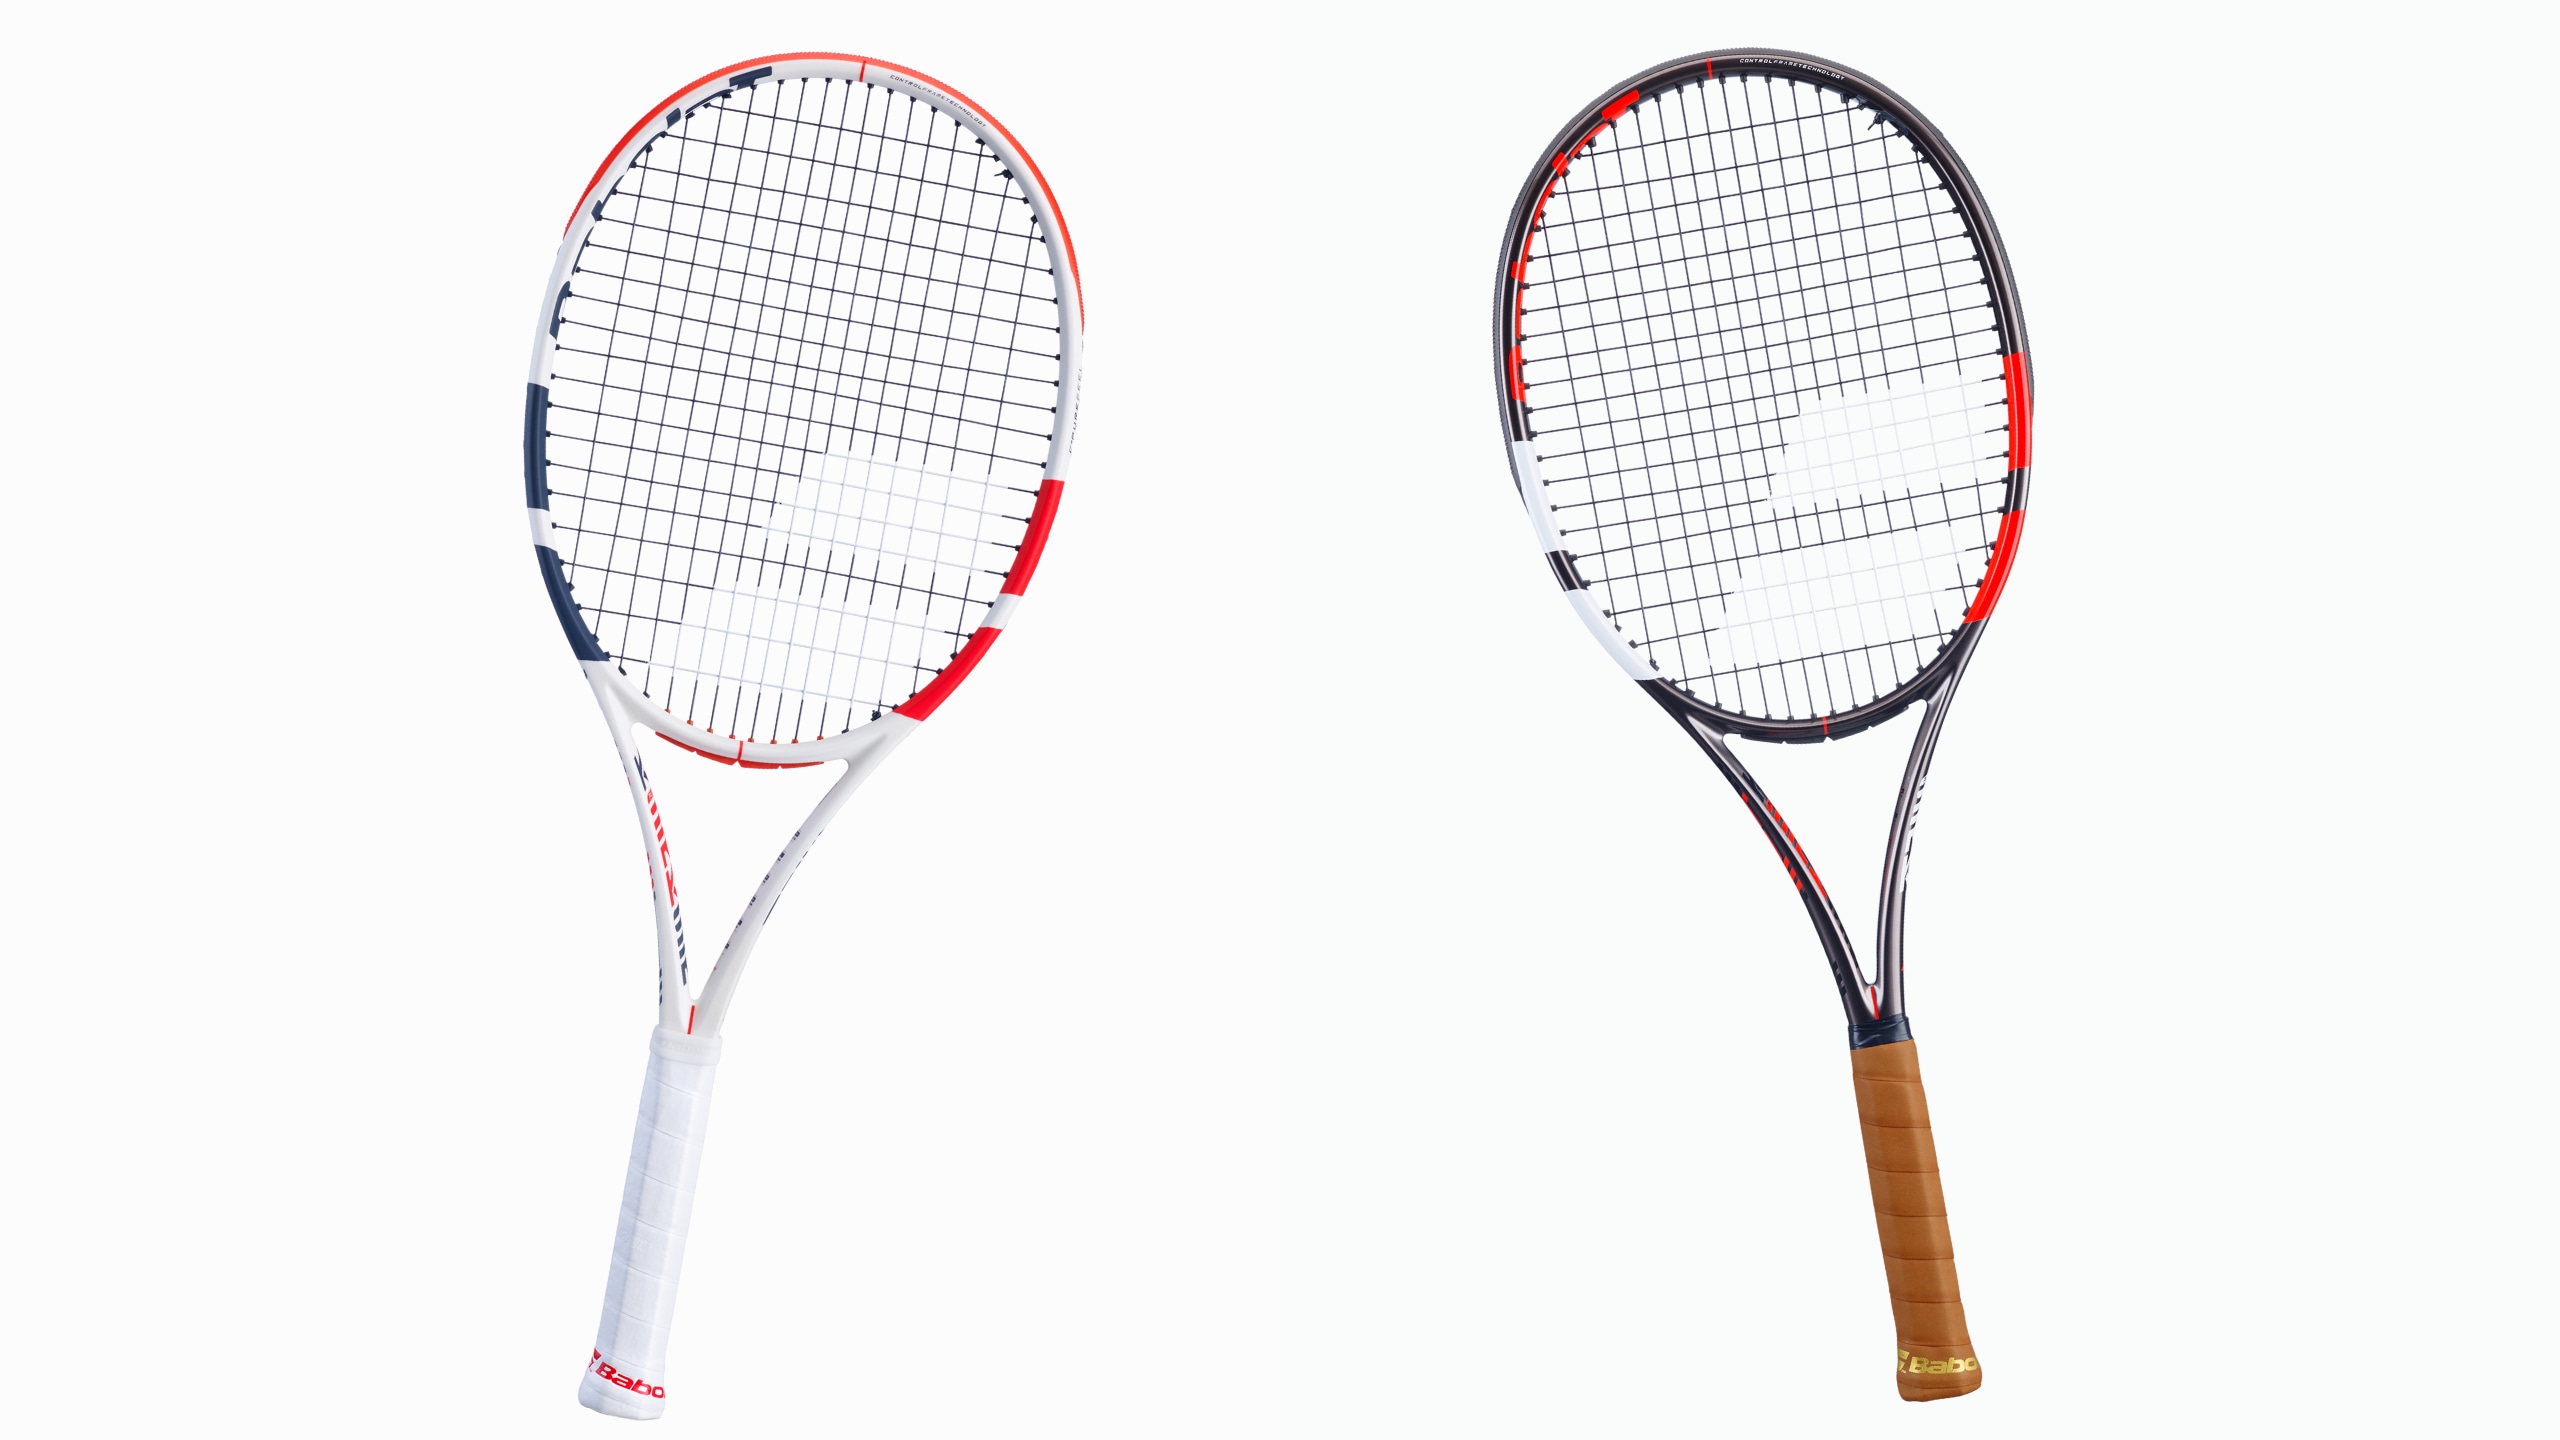 2022 Gear Guide: Babolat Racquets—Pure Strike 103 and Pure Strike VS